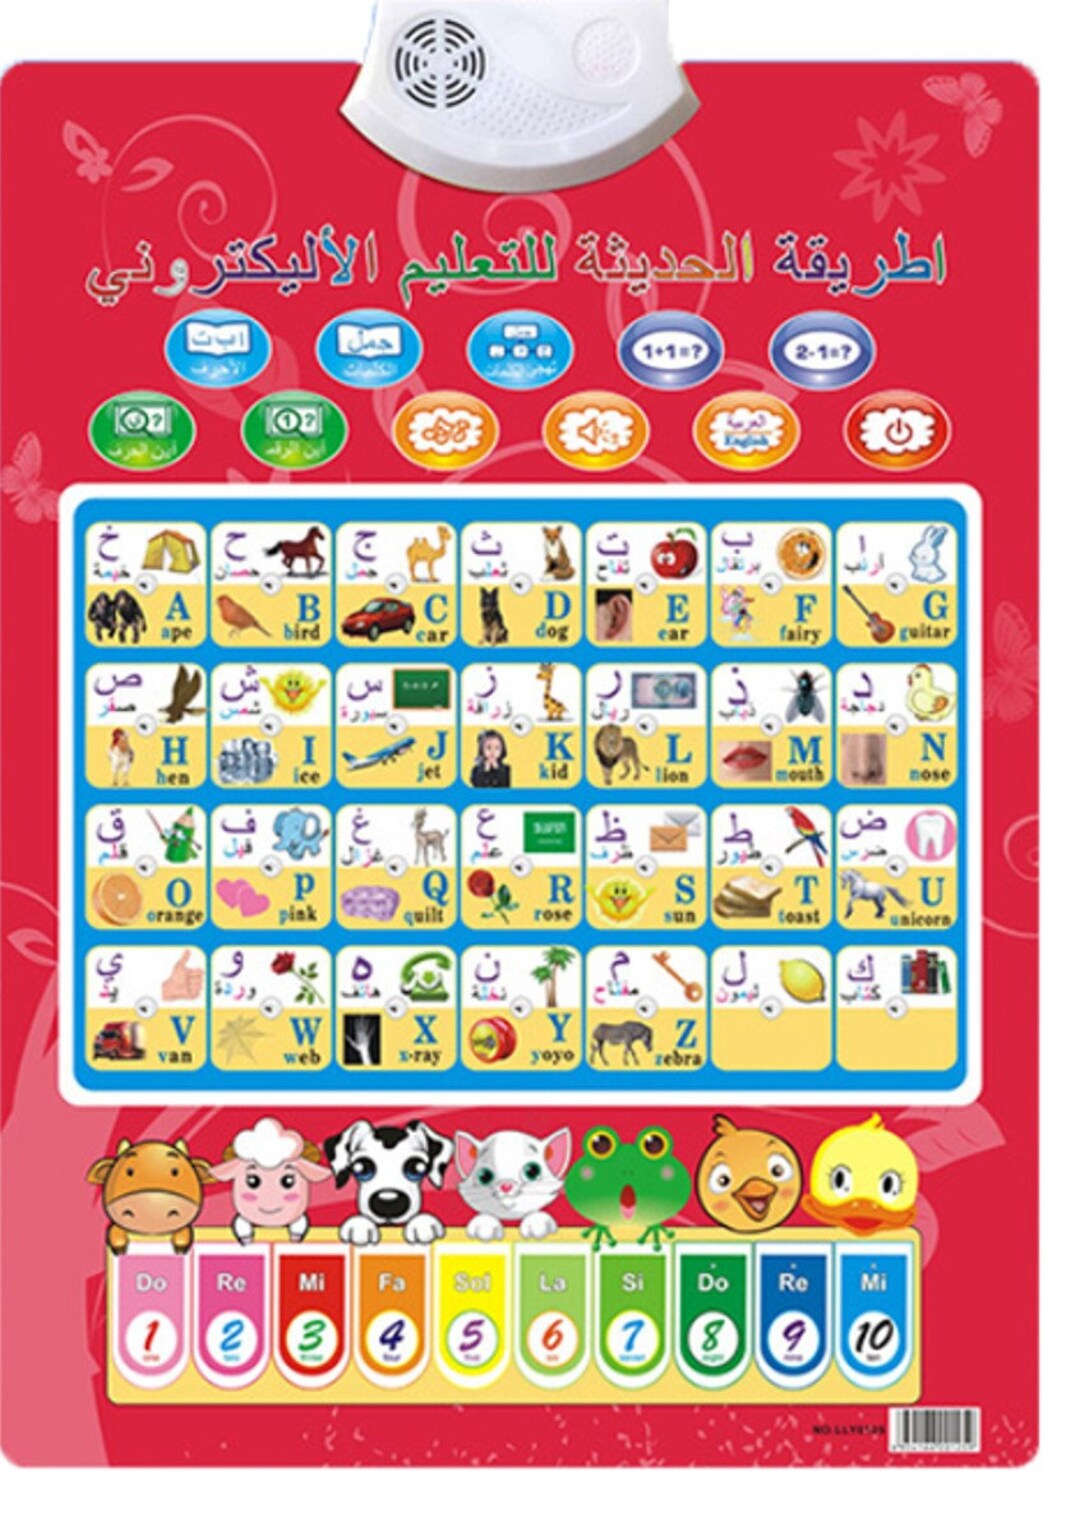 Ramadan Eid Mubarak Arabic Alphabet for Kids to Learn Interactive Touch Pad  Numbers,sounds,spelling, Math, Animals, Nursery Rhymes. 